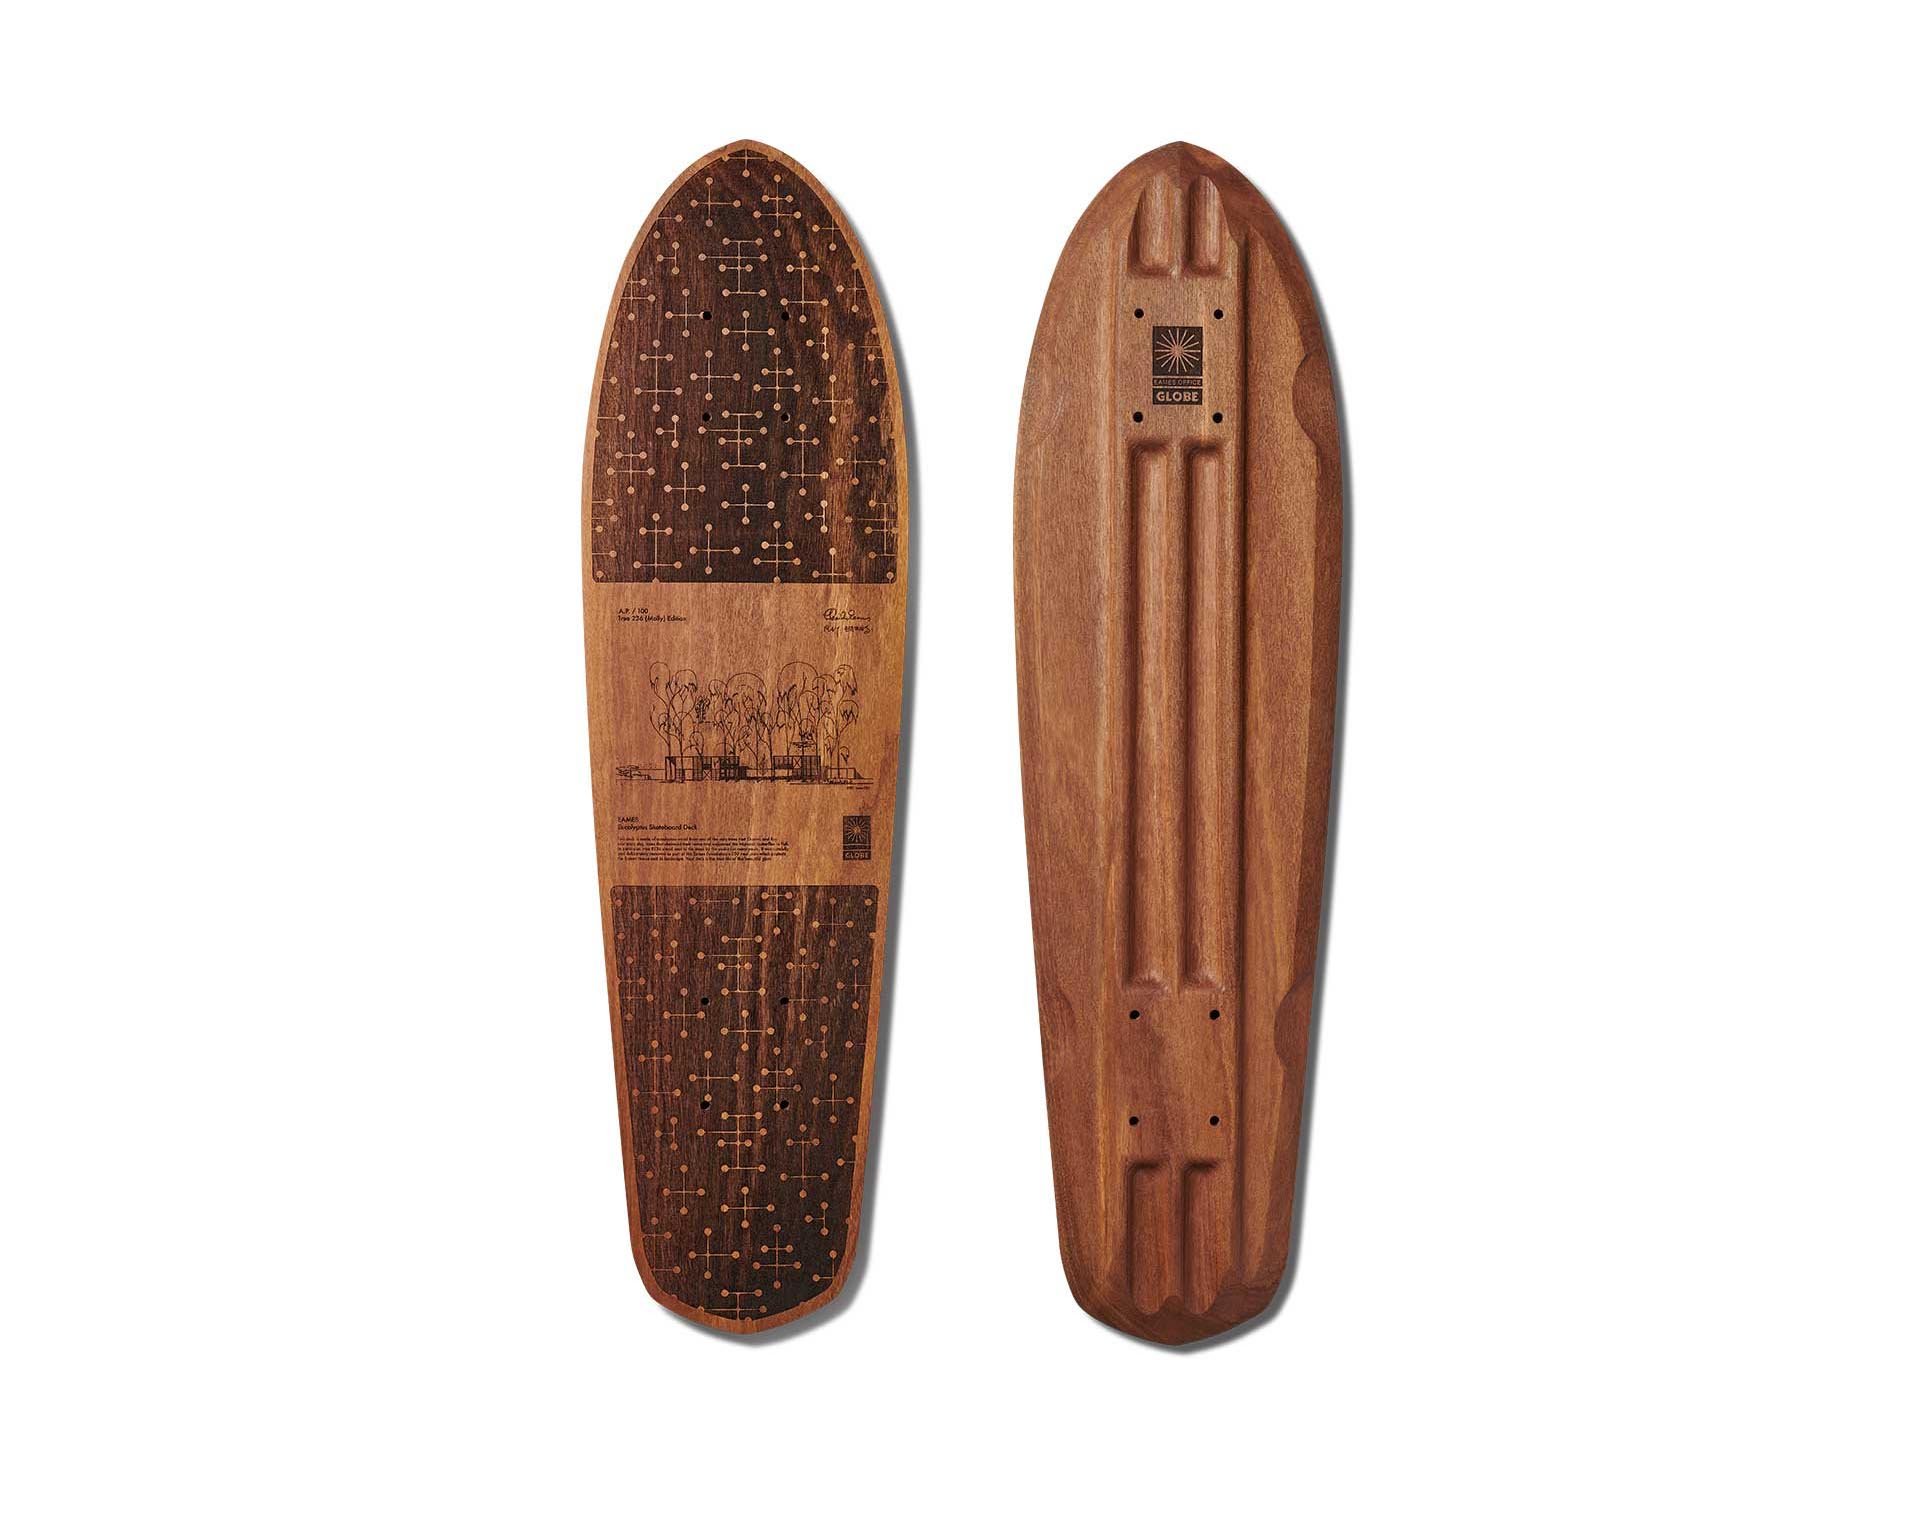 Globe Skateboards | Introducing the Eames Office Limited Edition Deck